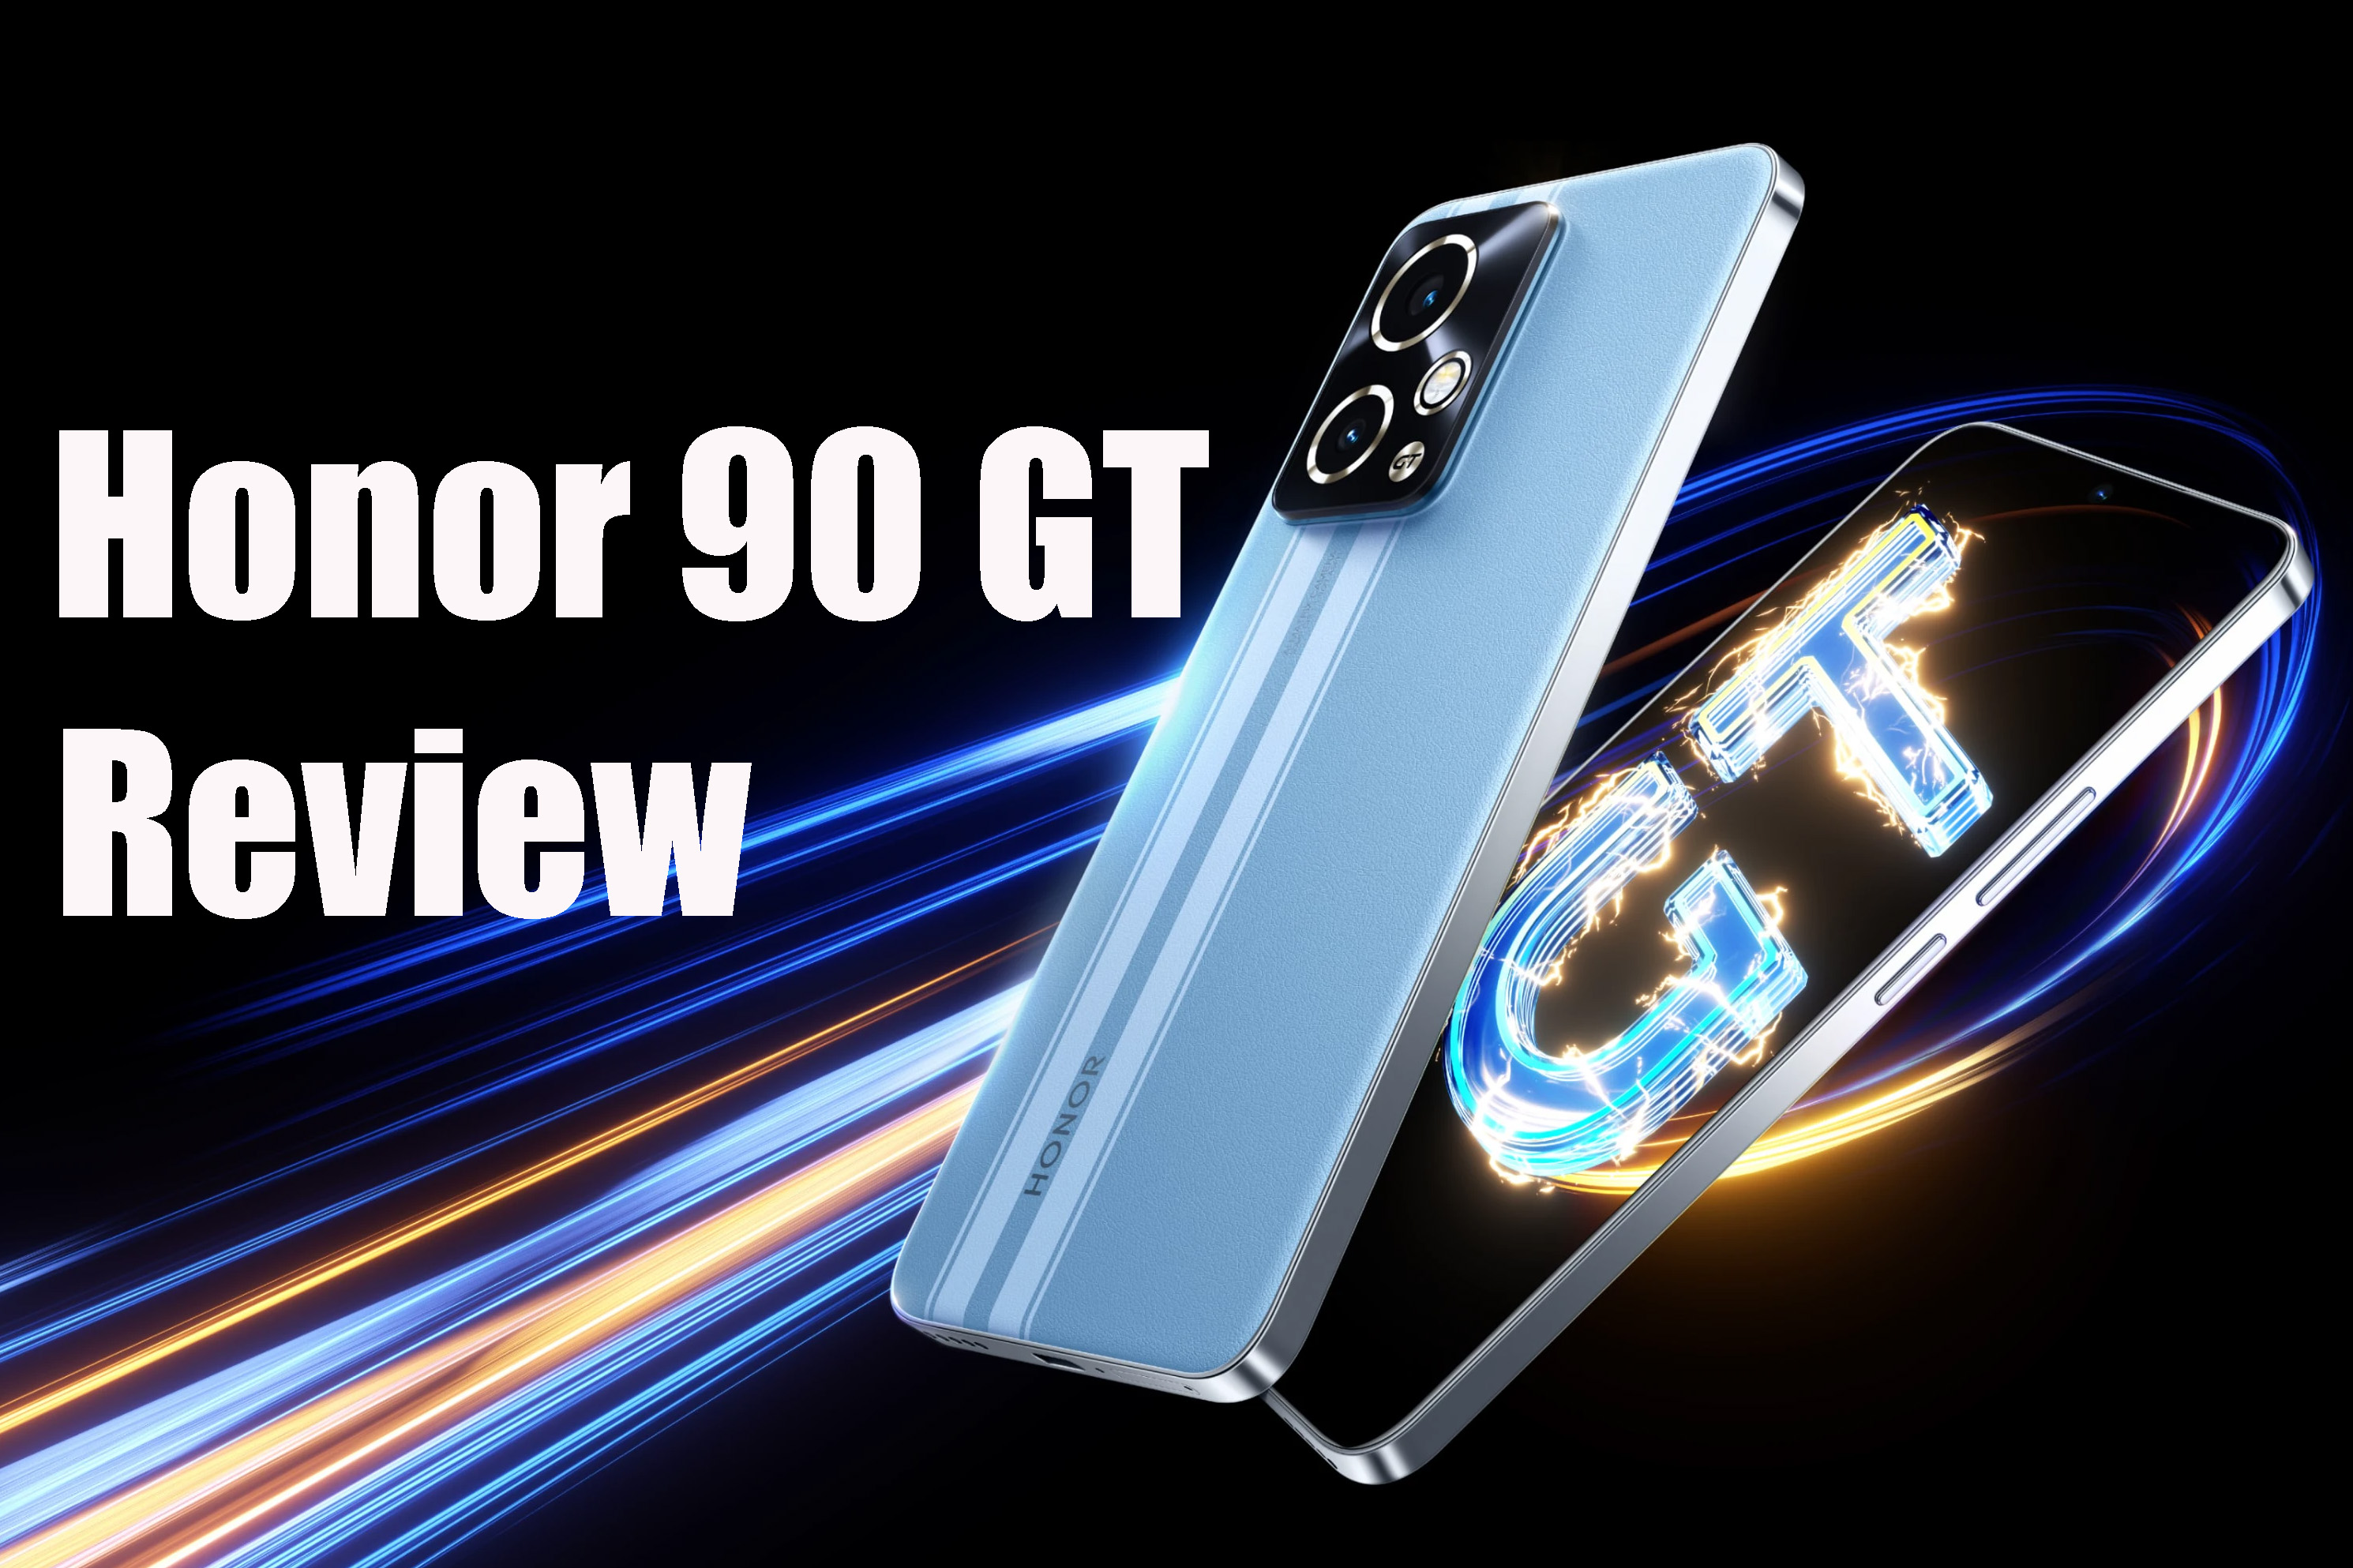 Honor 90 GT Review